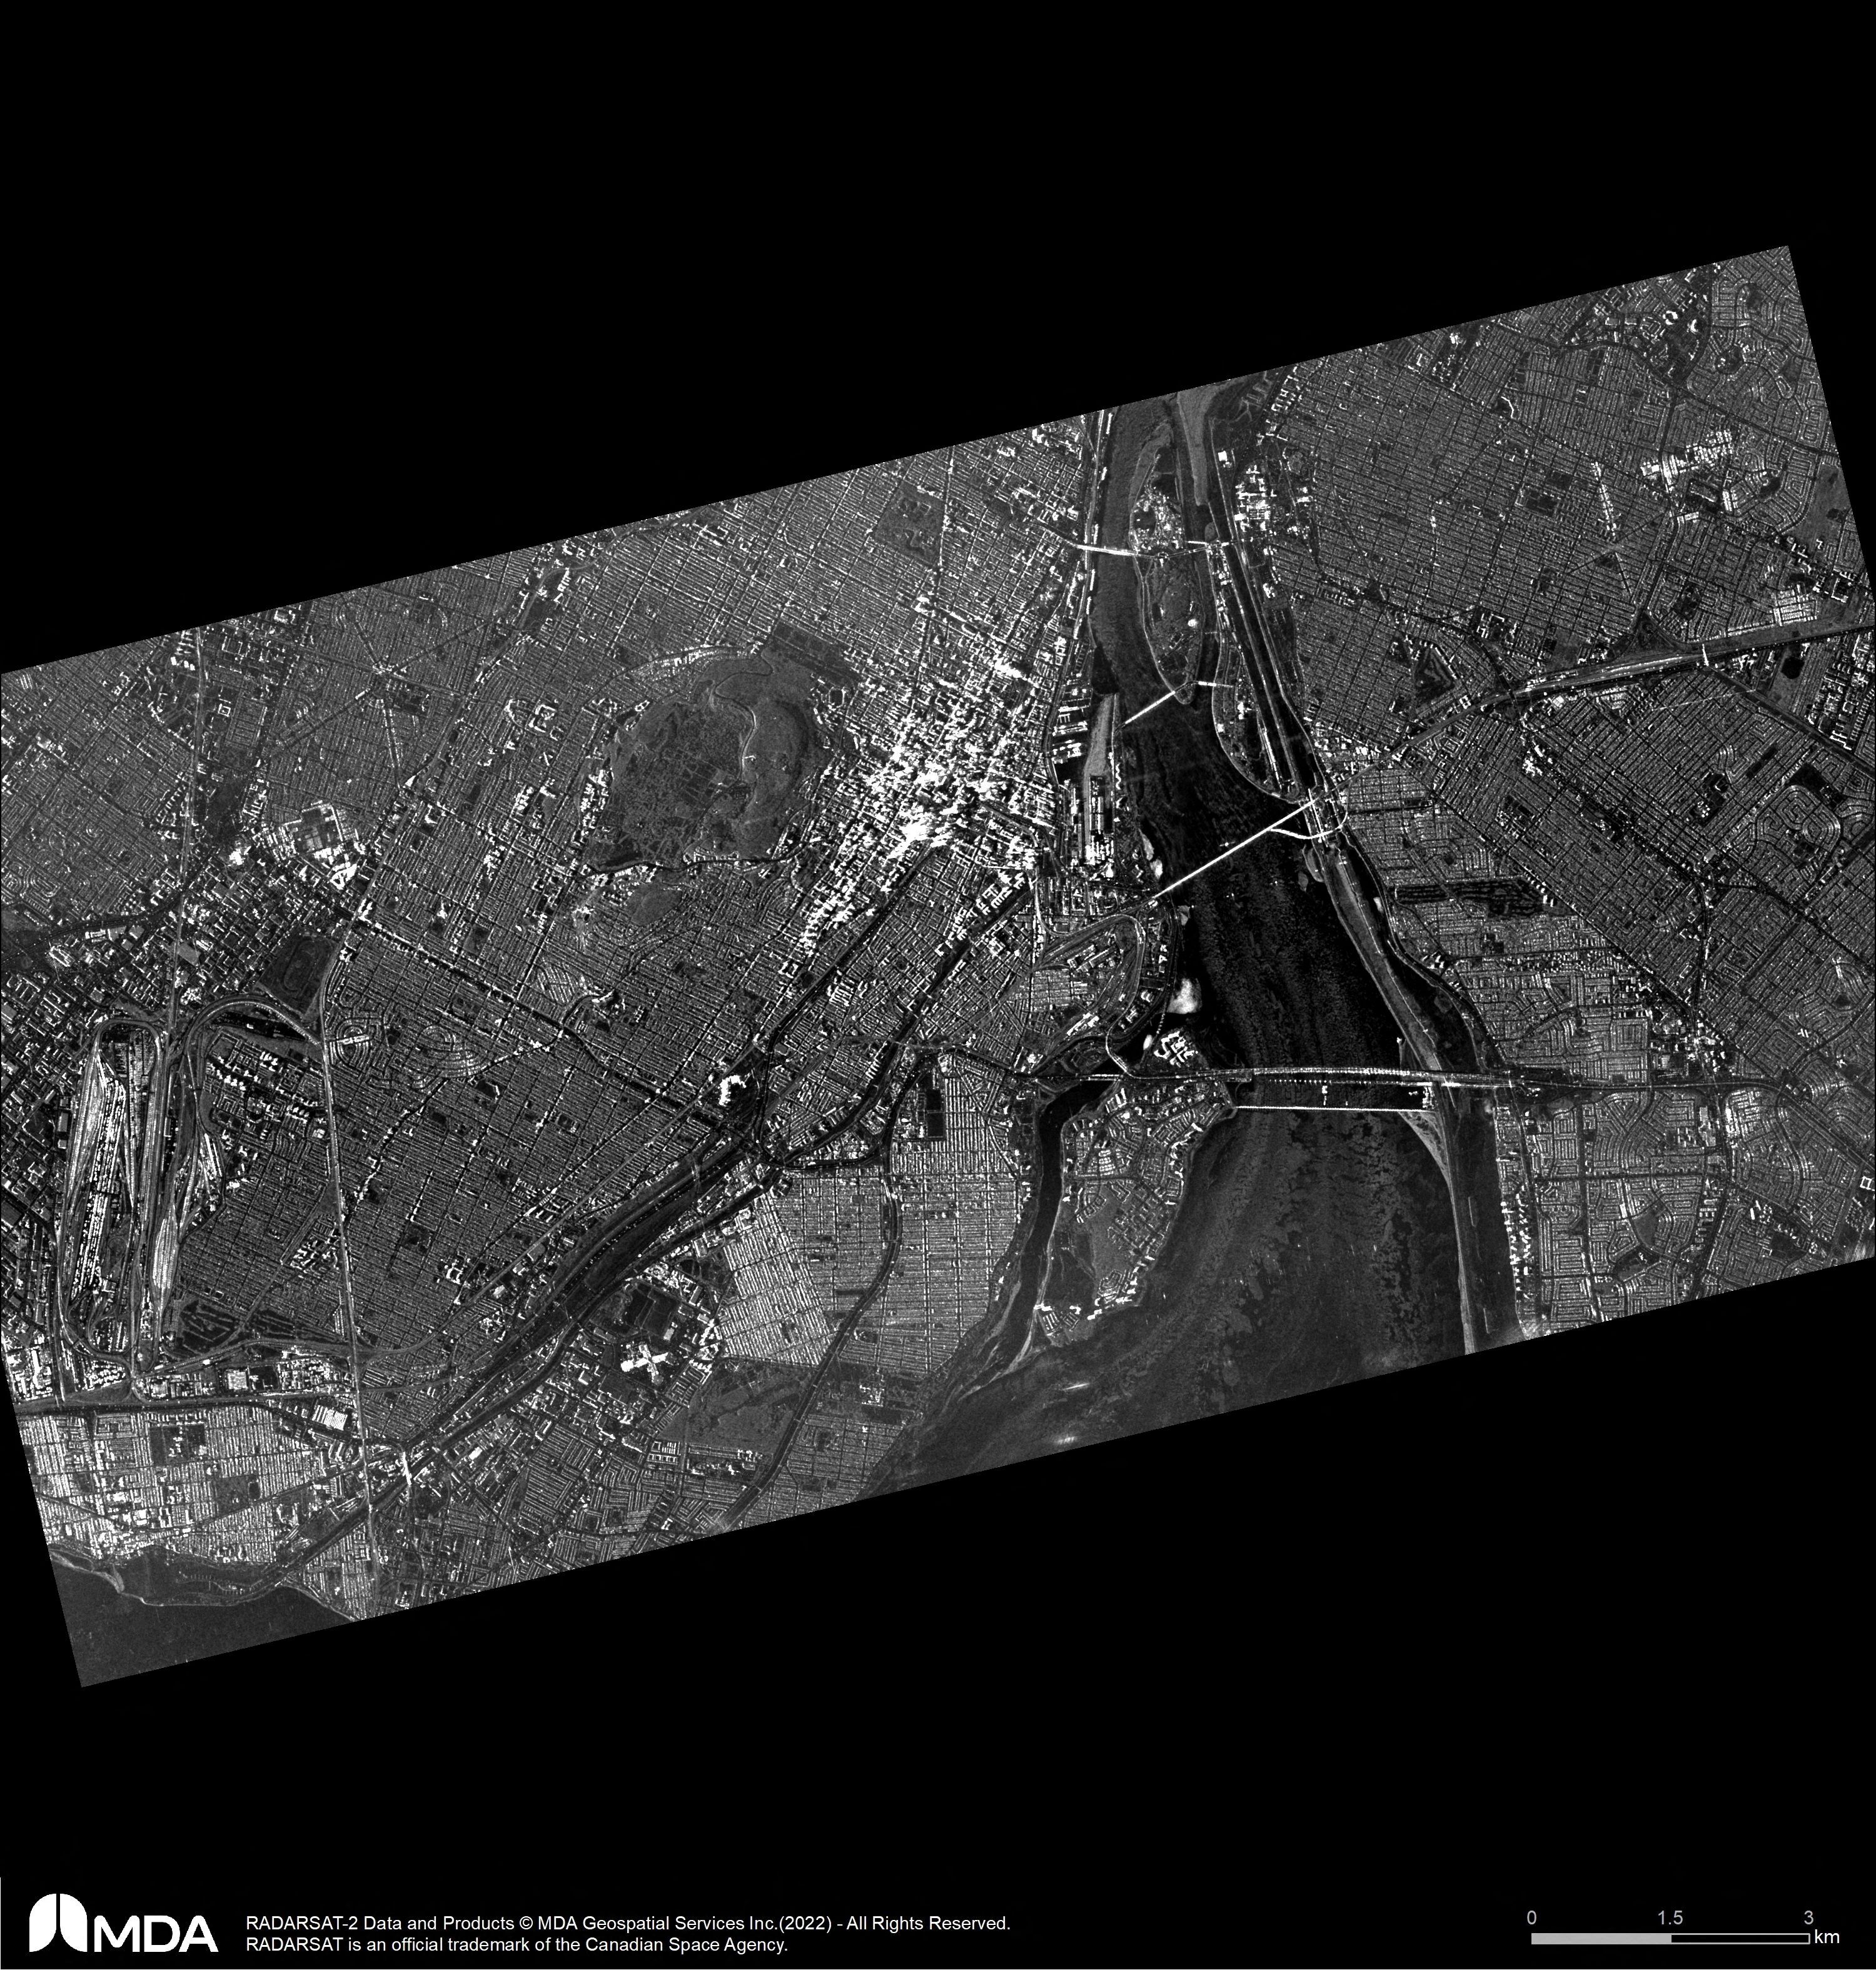 A satellite image by Canada's MDA Inc is seen of the city of Montreal